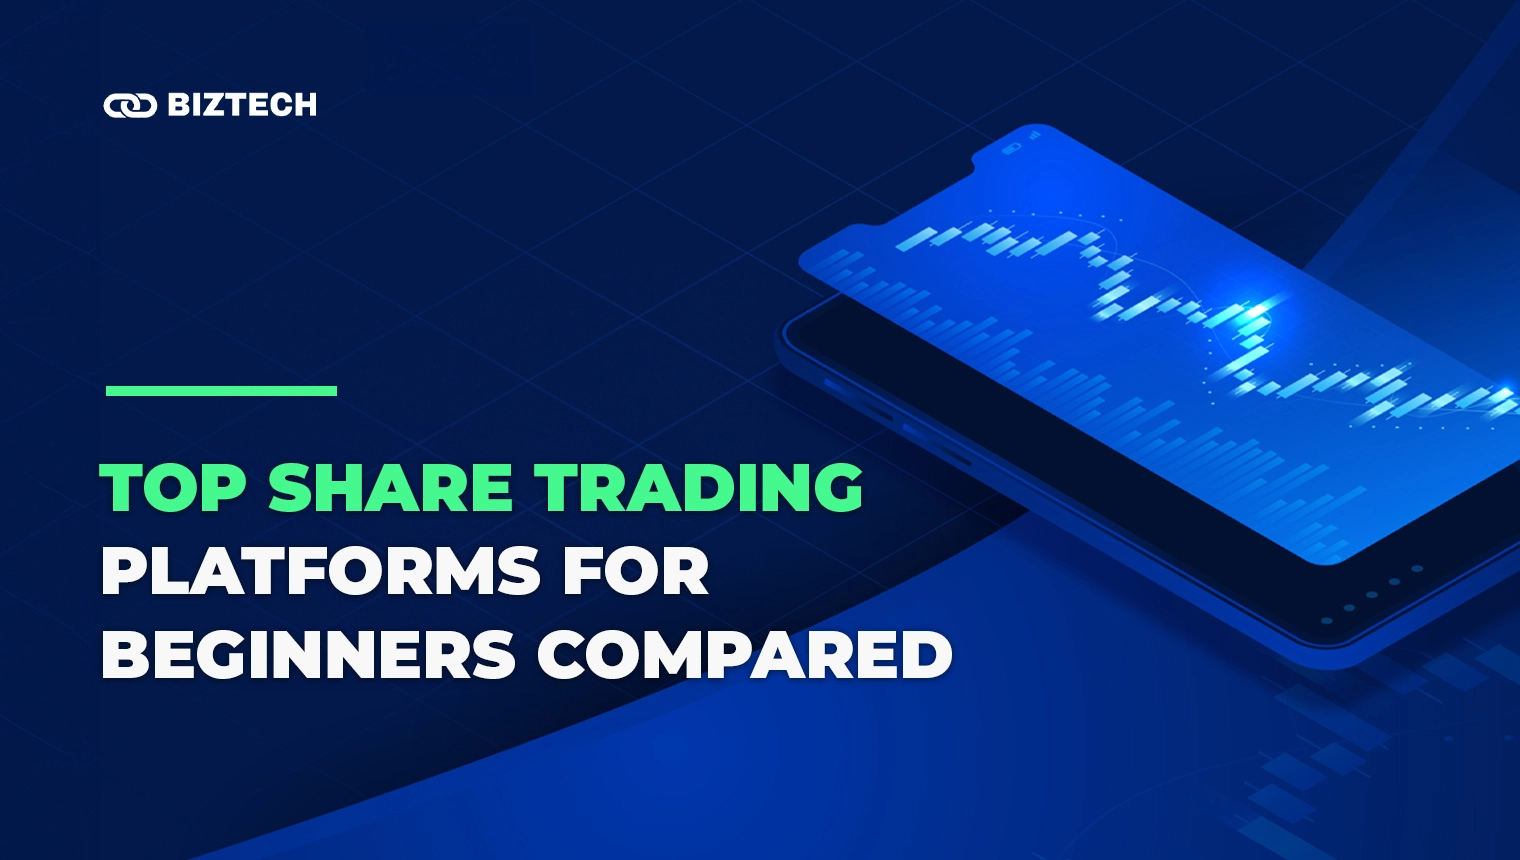 Top Share Trading Platforms for Beginners Compared